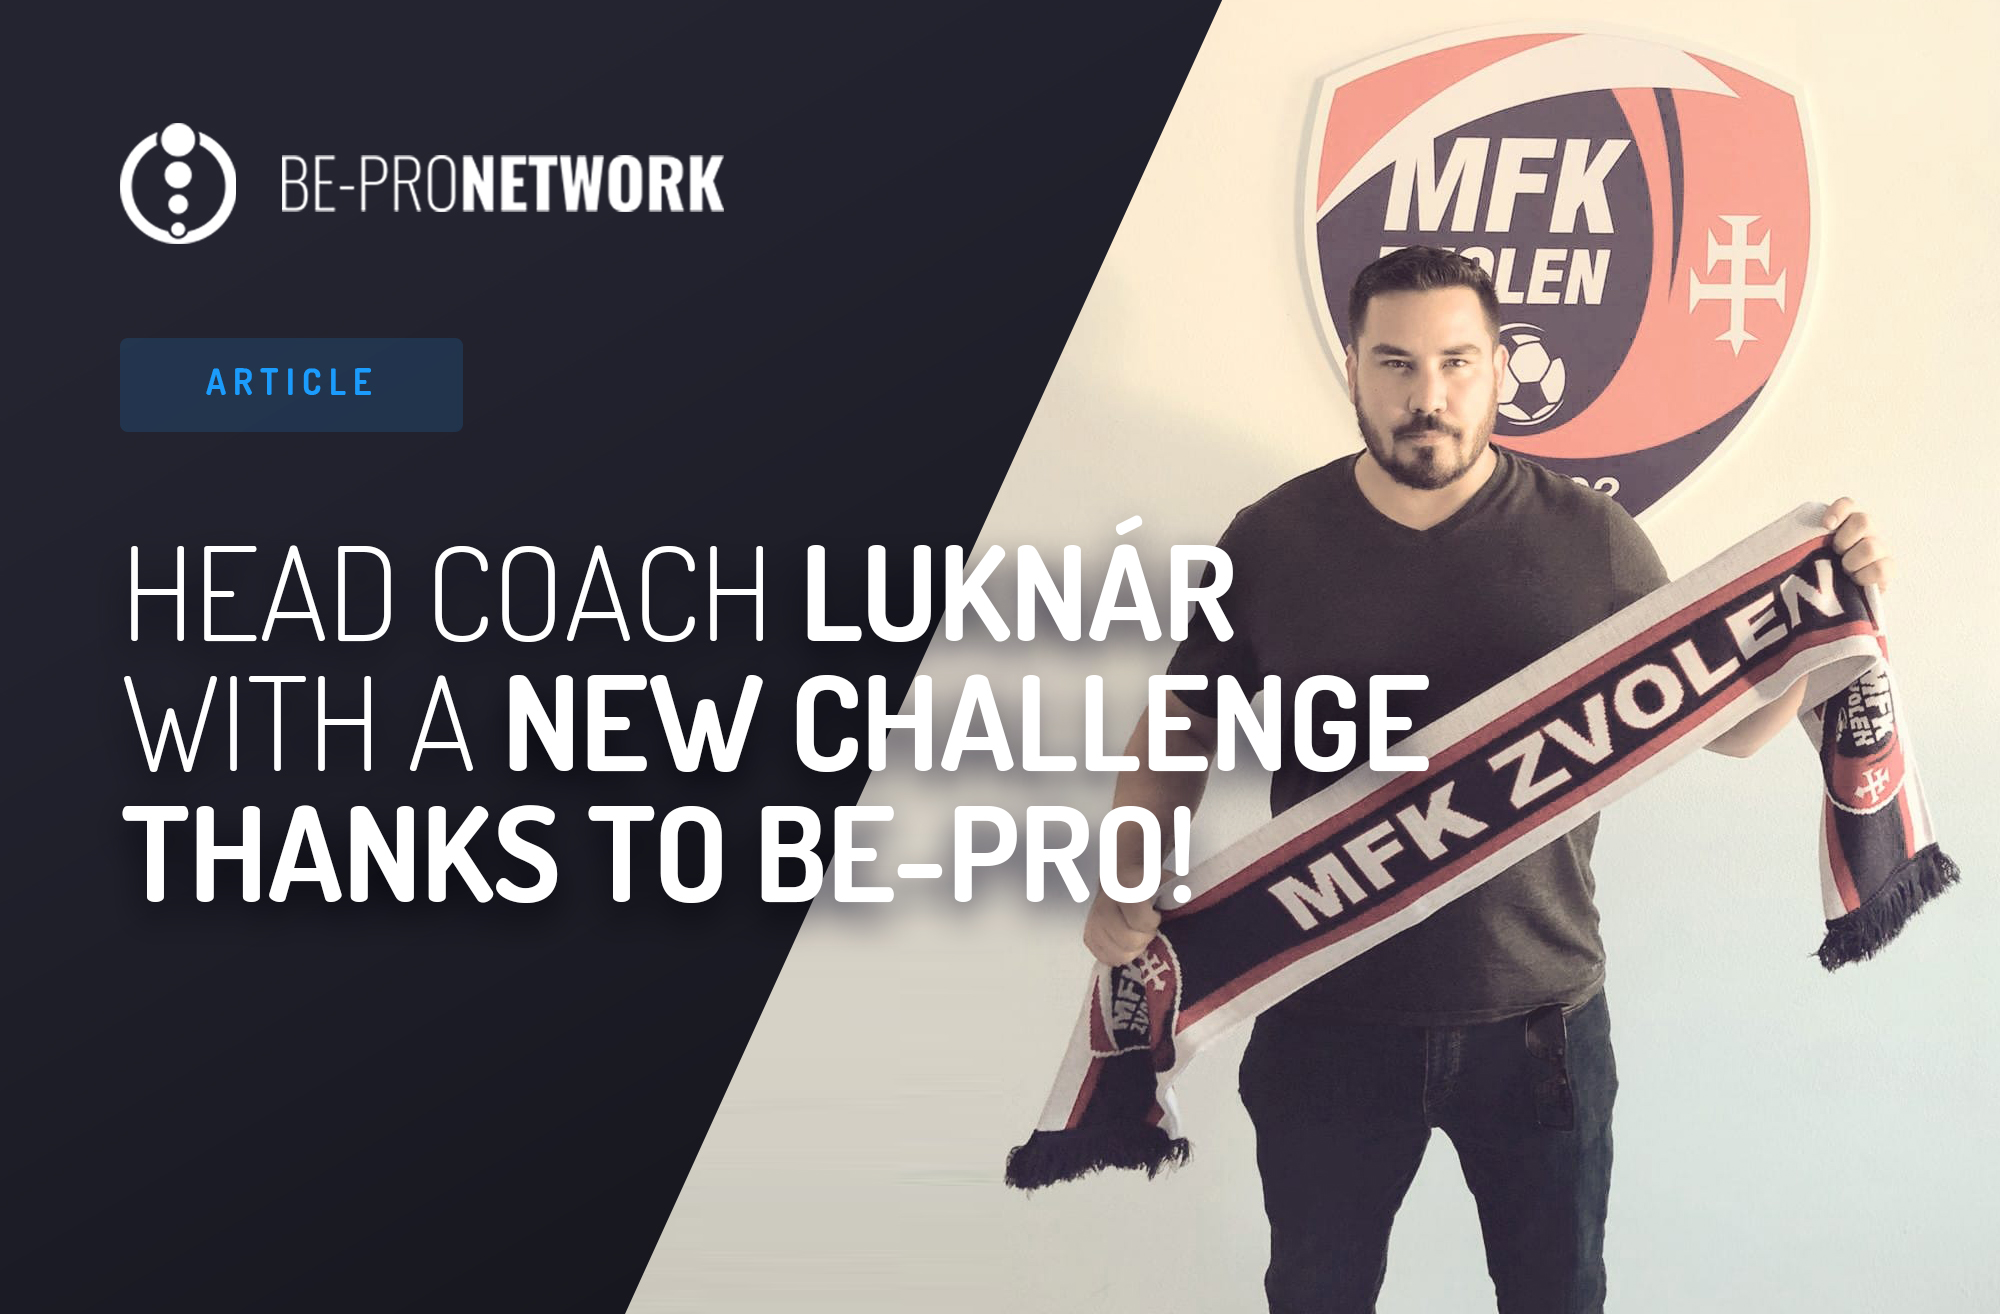 Coach Luknár: BE-PRO is a unique way to find players